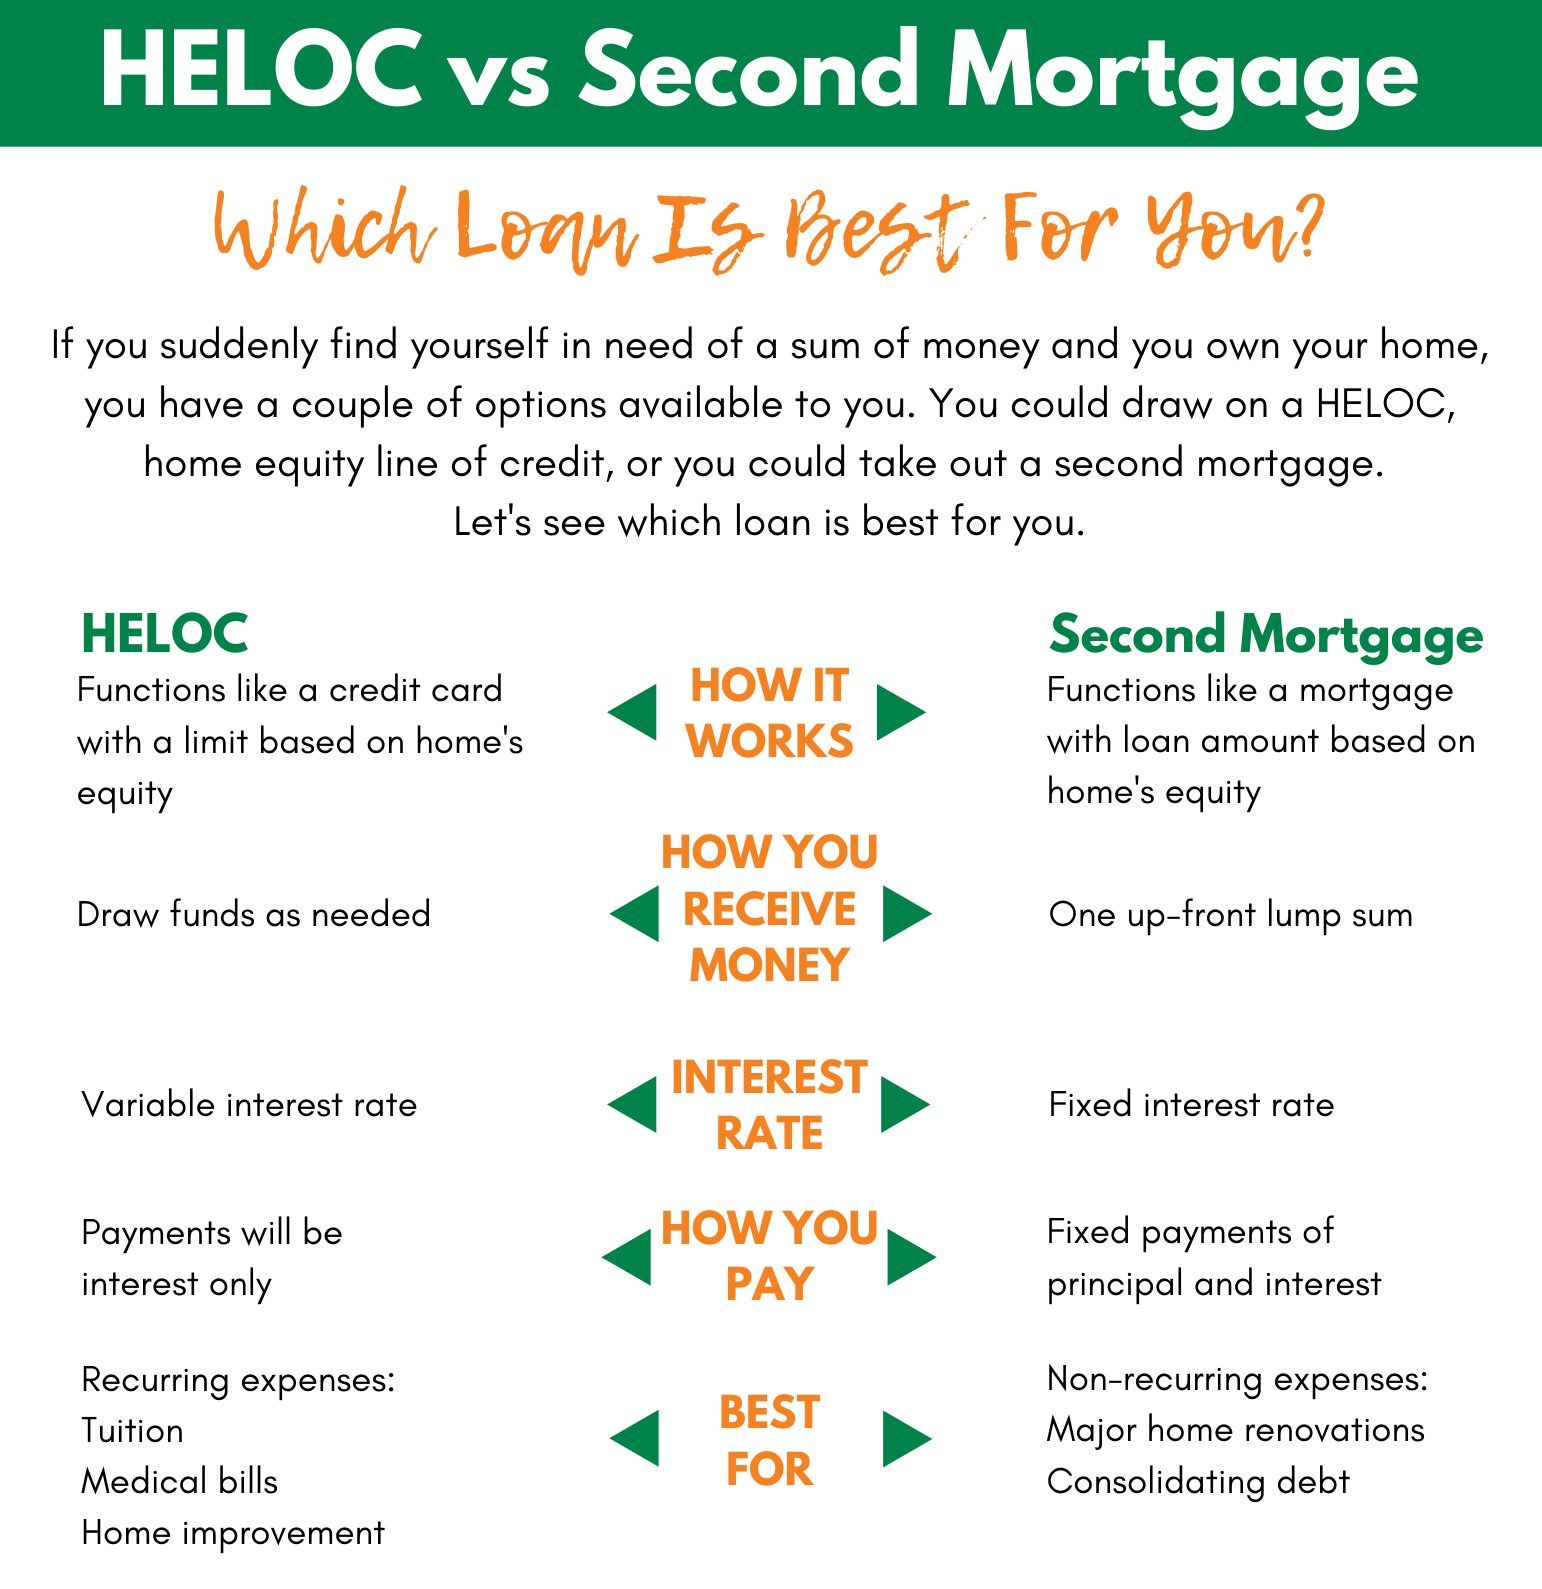 HELOC vs Second Mortgage